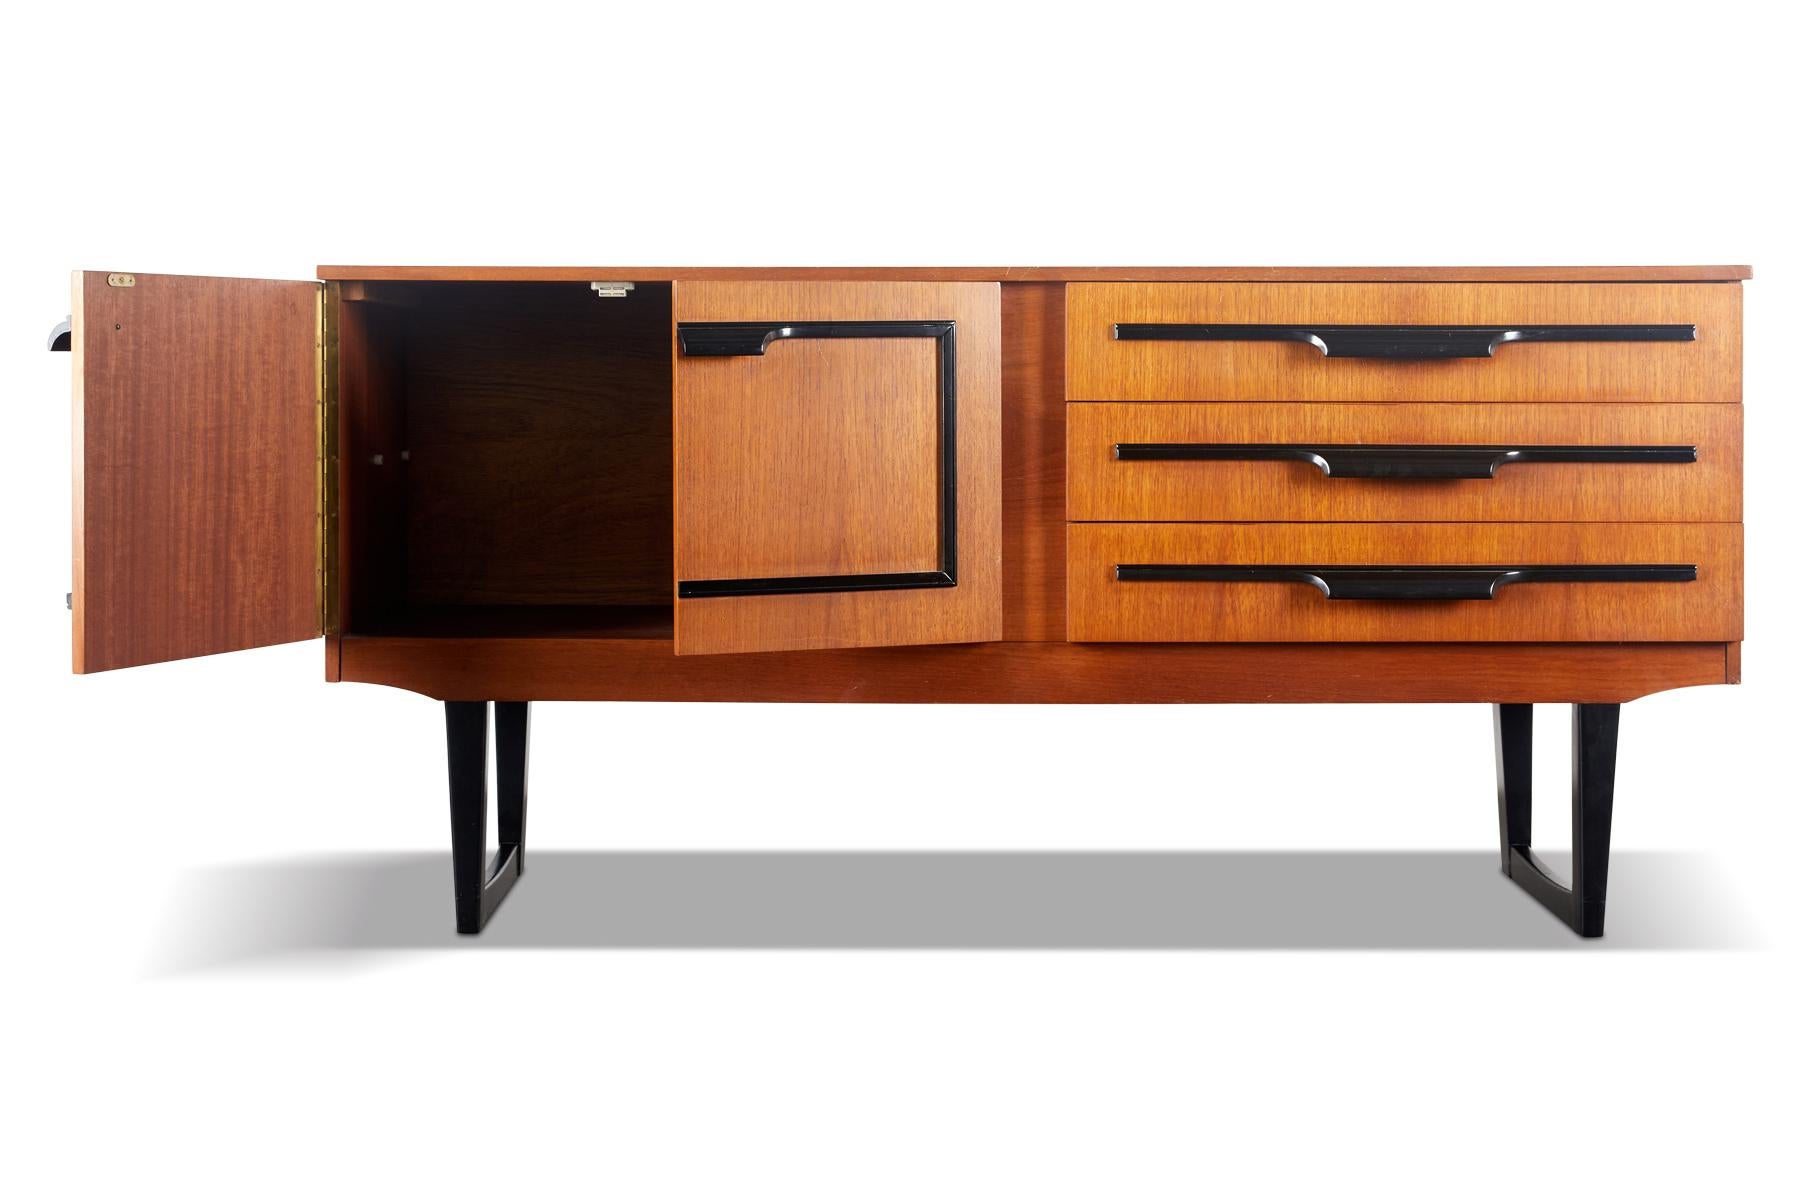 20th Century English Modern Midcentury Credenza in Teak with Black Lacquer Accents